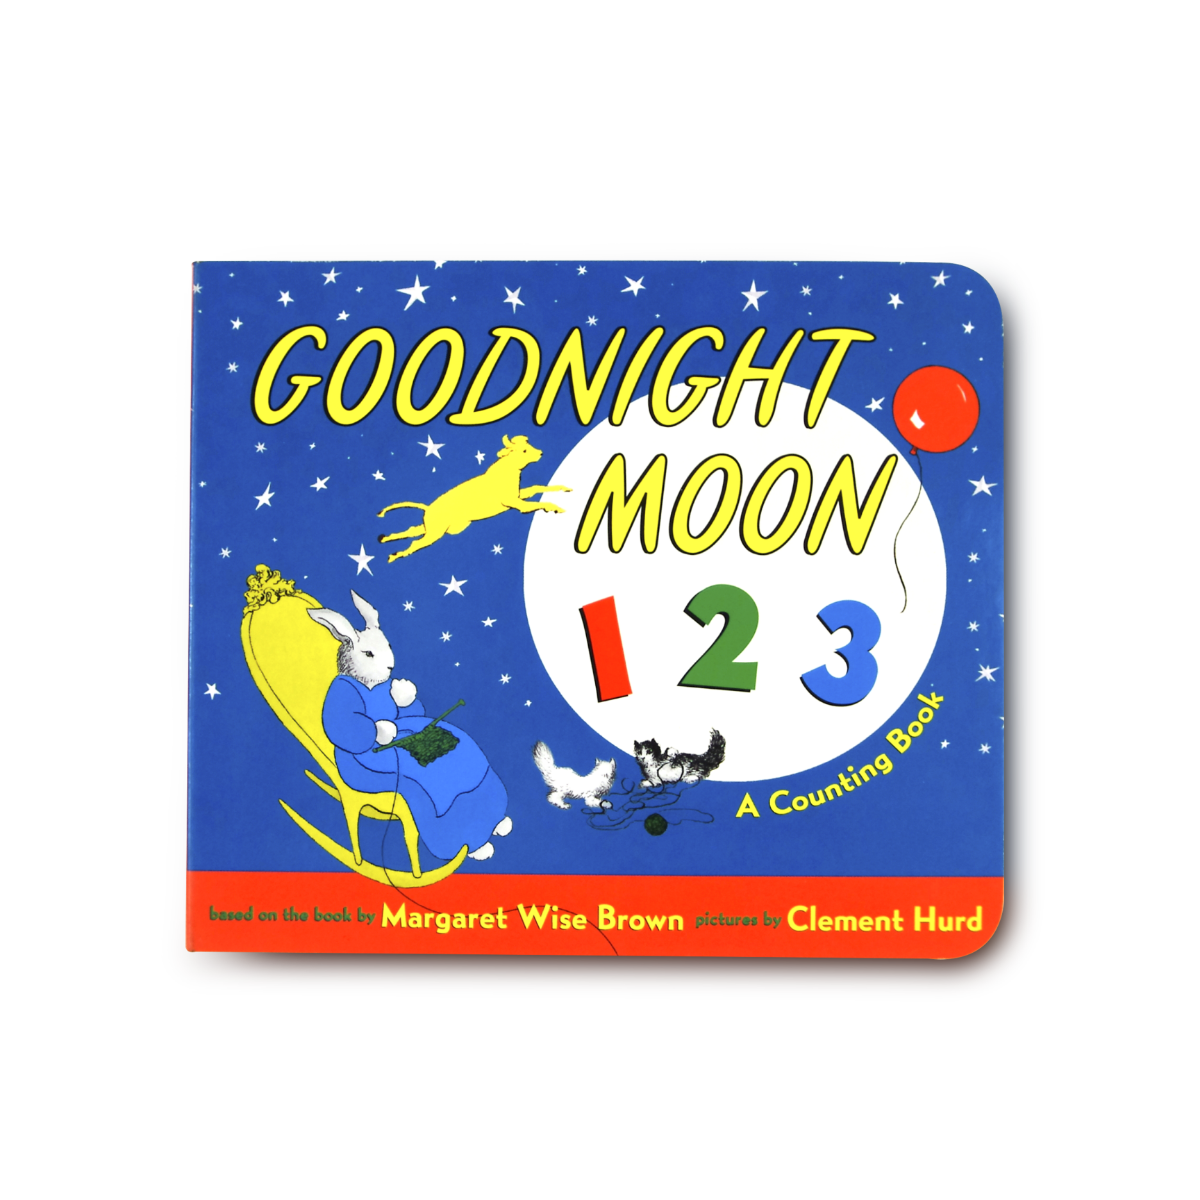 Goodnight Moon 123 Board Book: A Counting Book - Me Books Asia Store